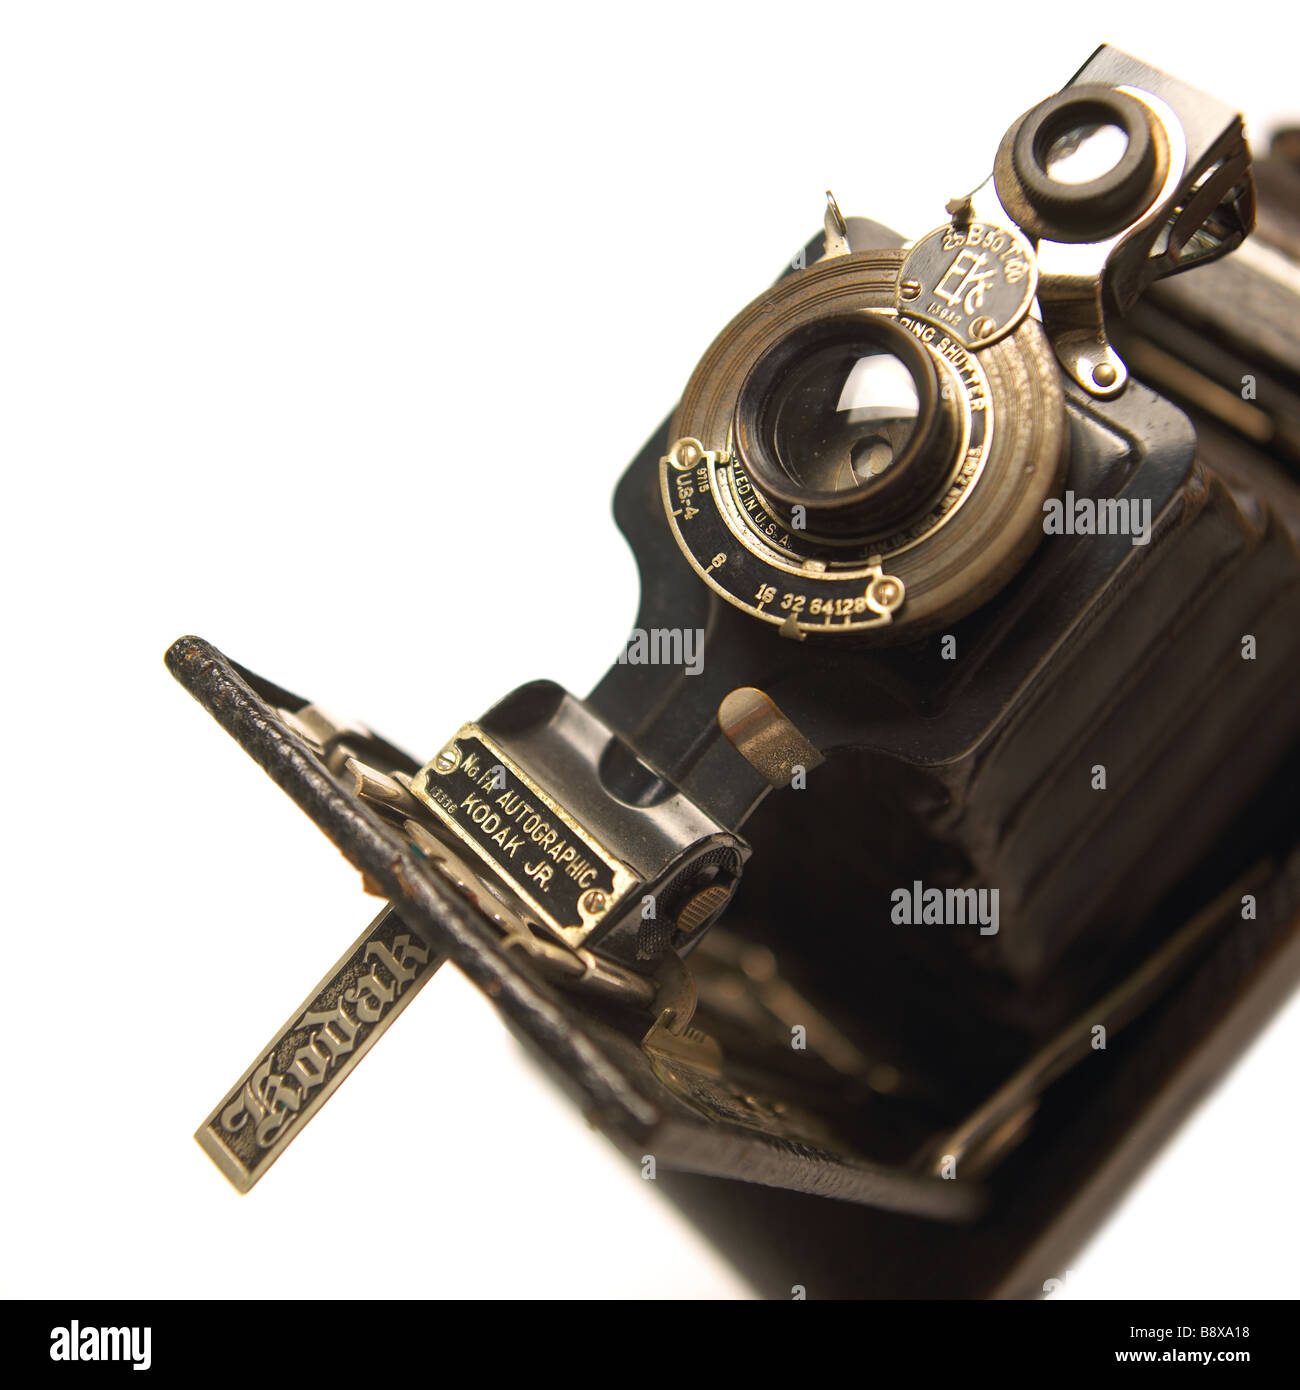 A kodak old fashioned bellowed camera on a white background Stock Photo